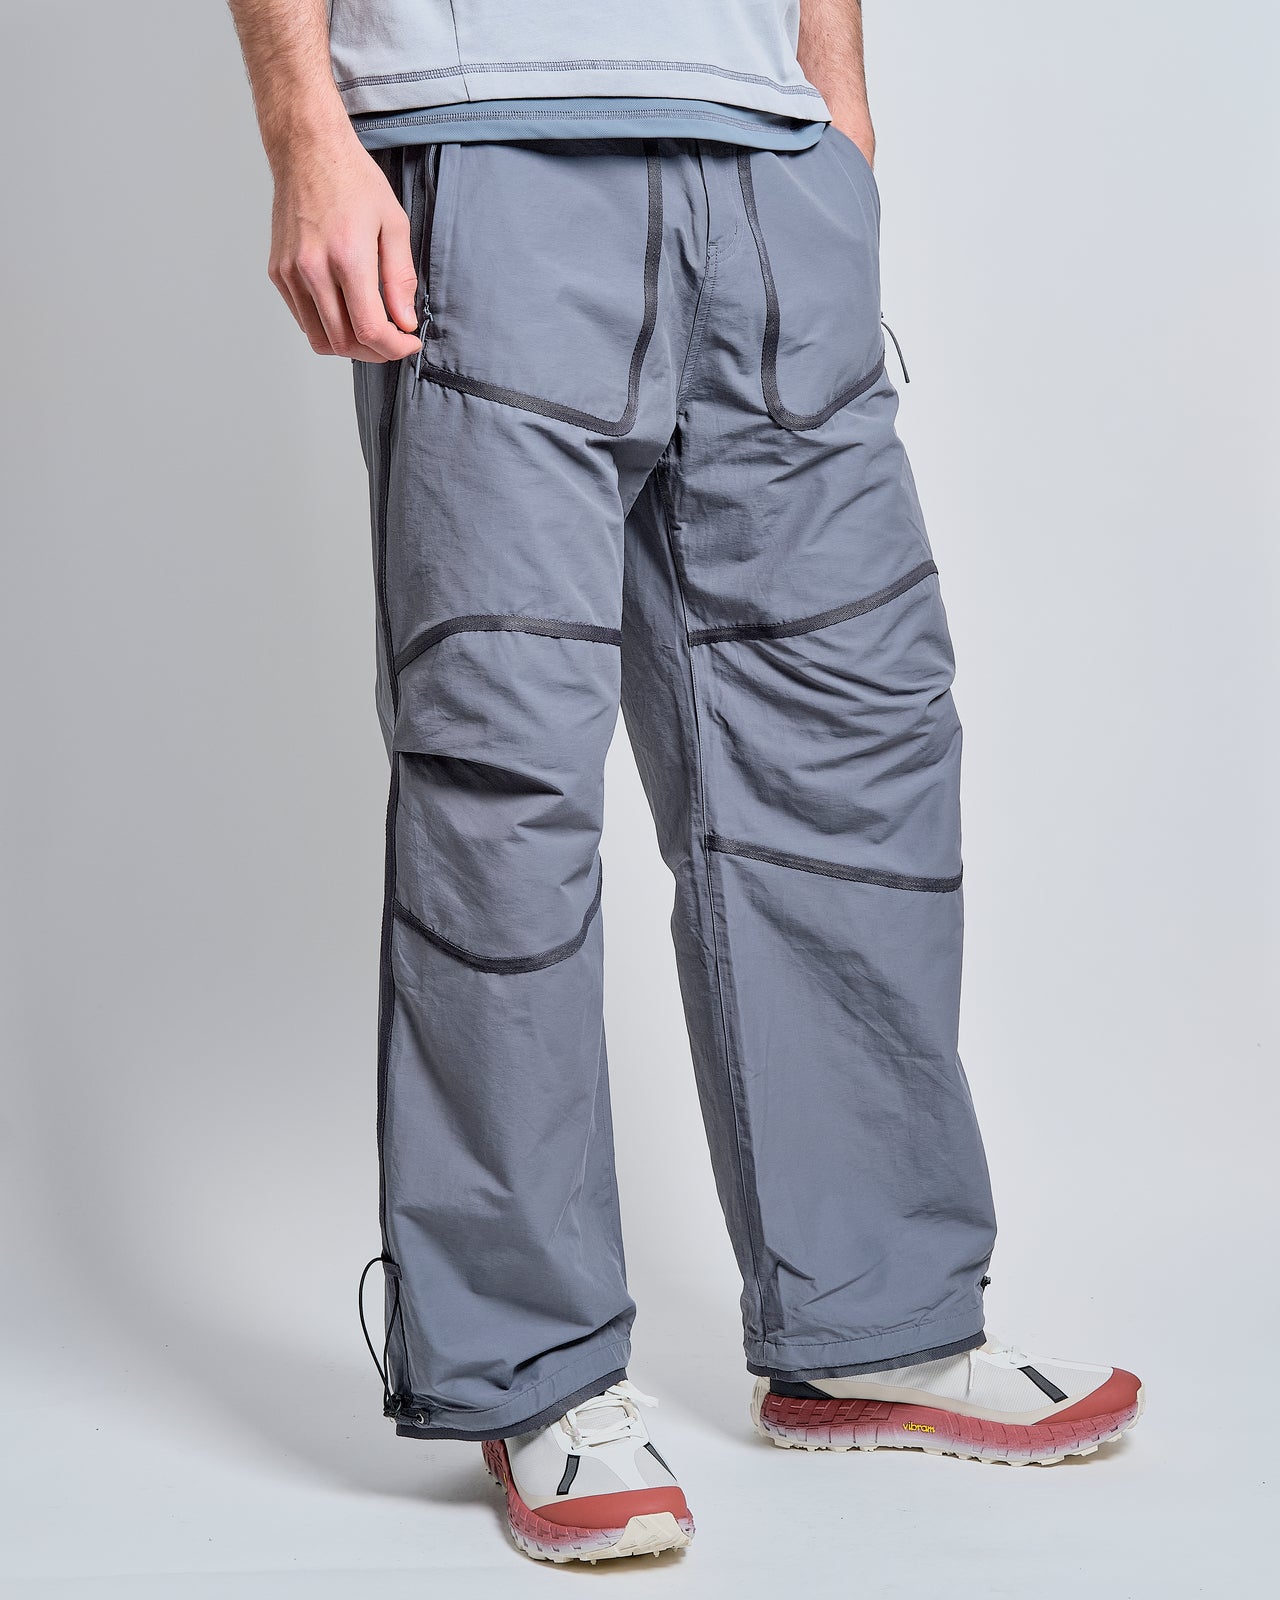 Webbing Patched Pants in Charcoal